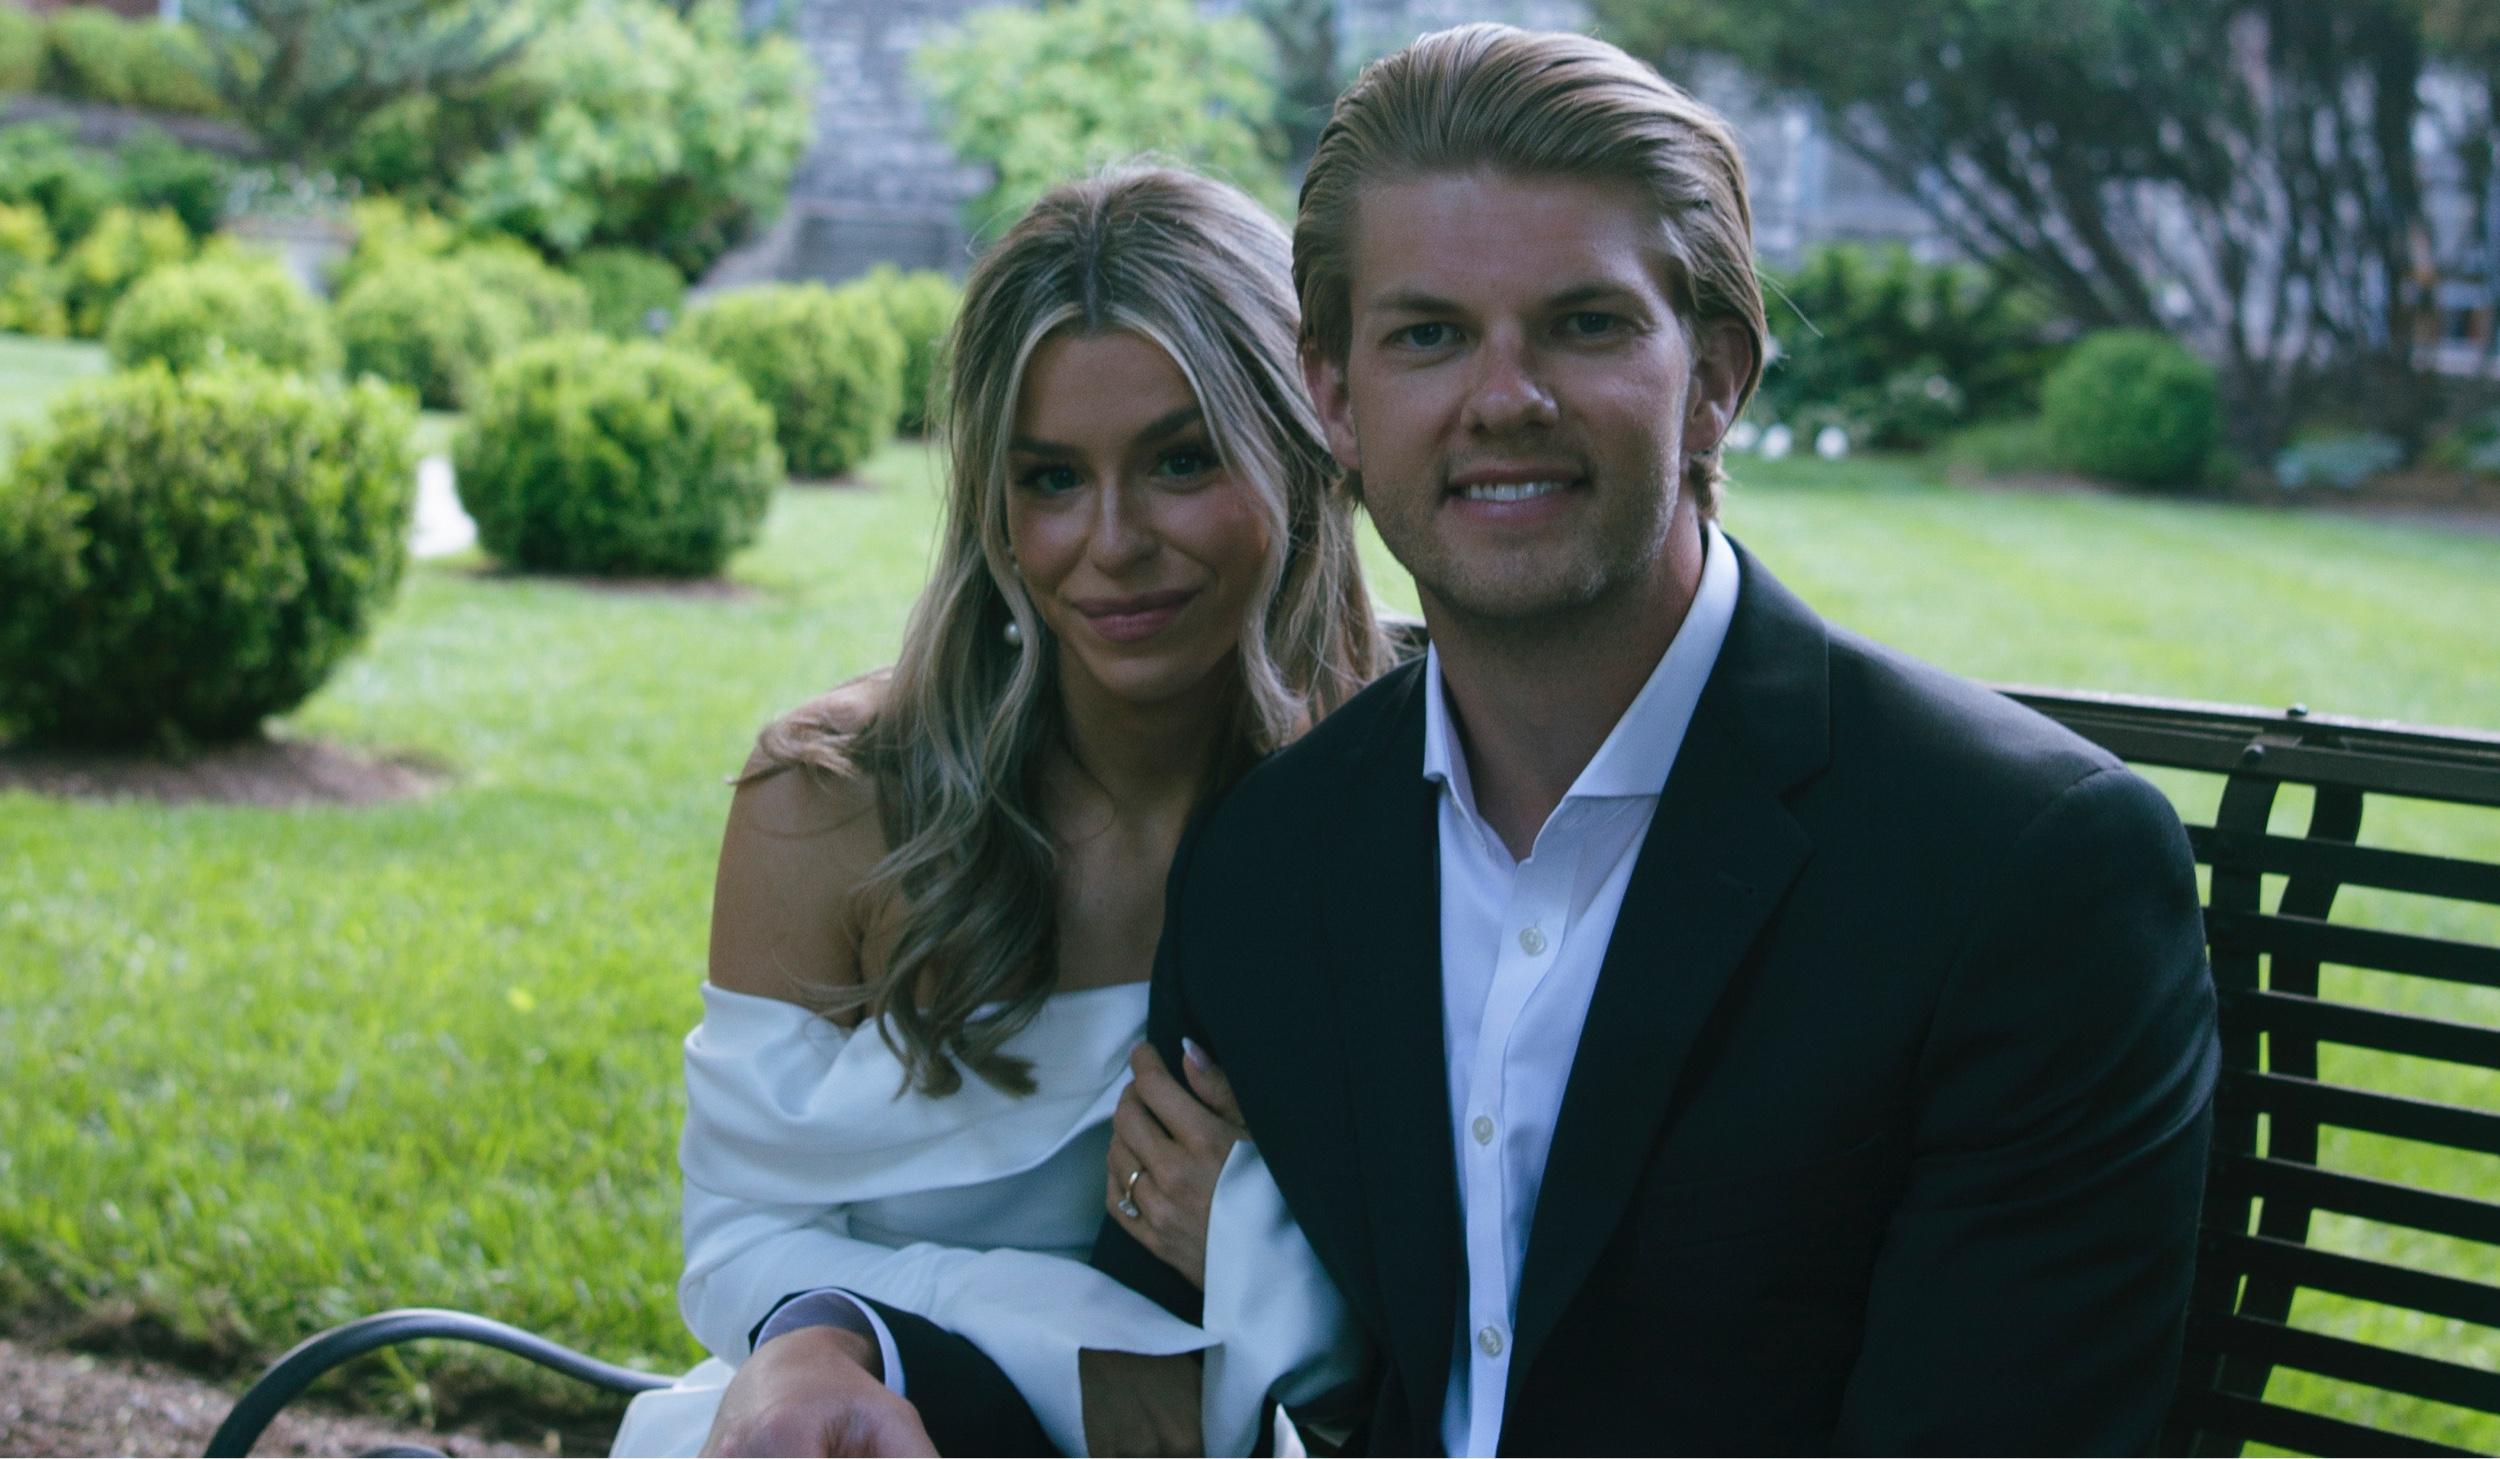 The Wedding Website of Alex Beyer and Candace Godin